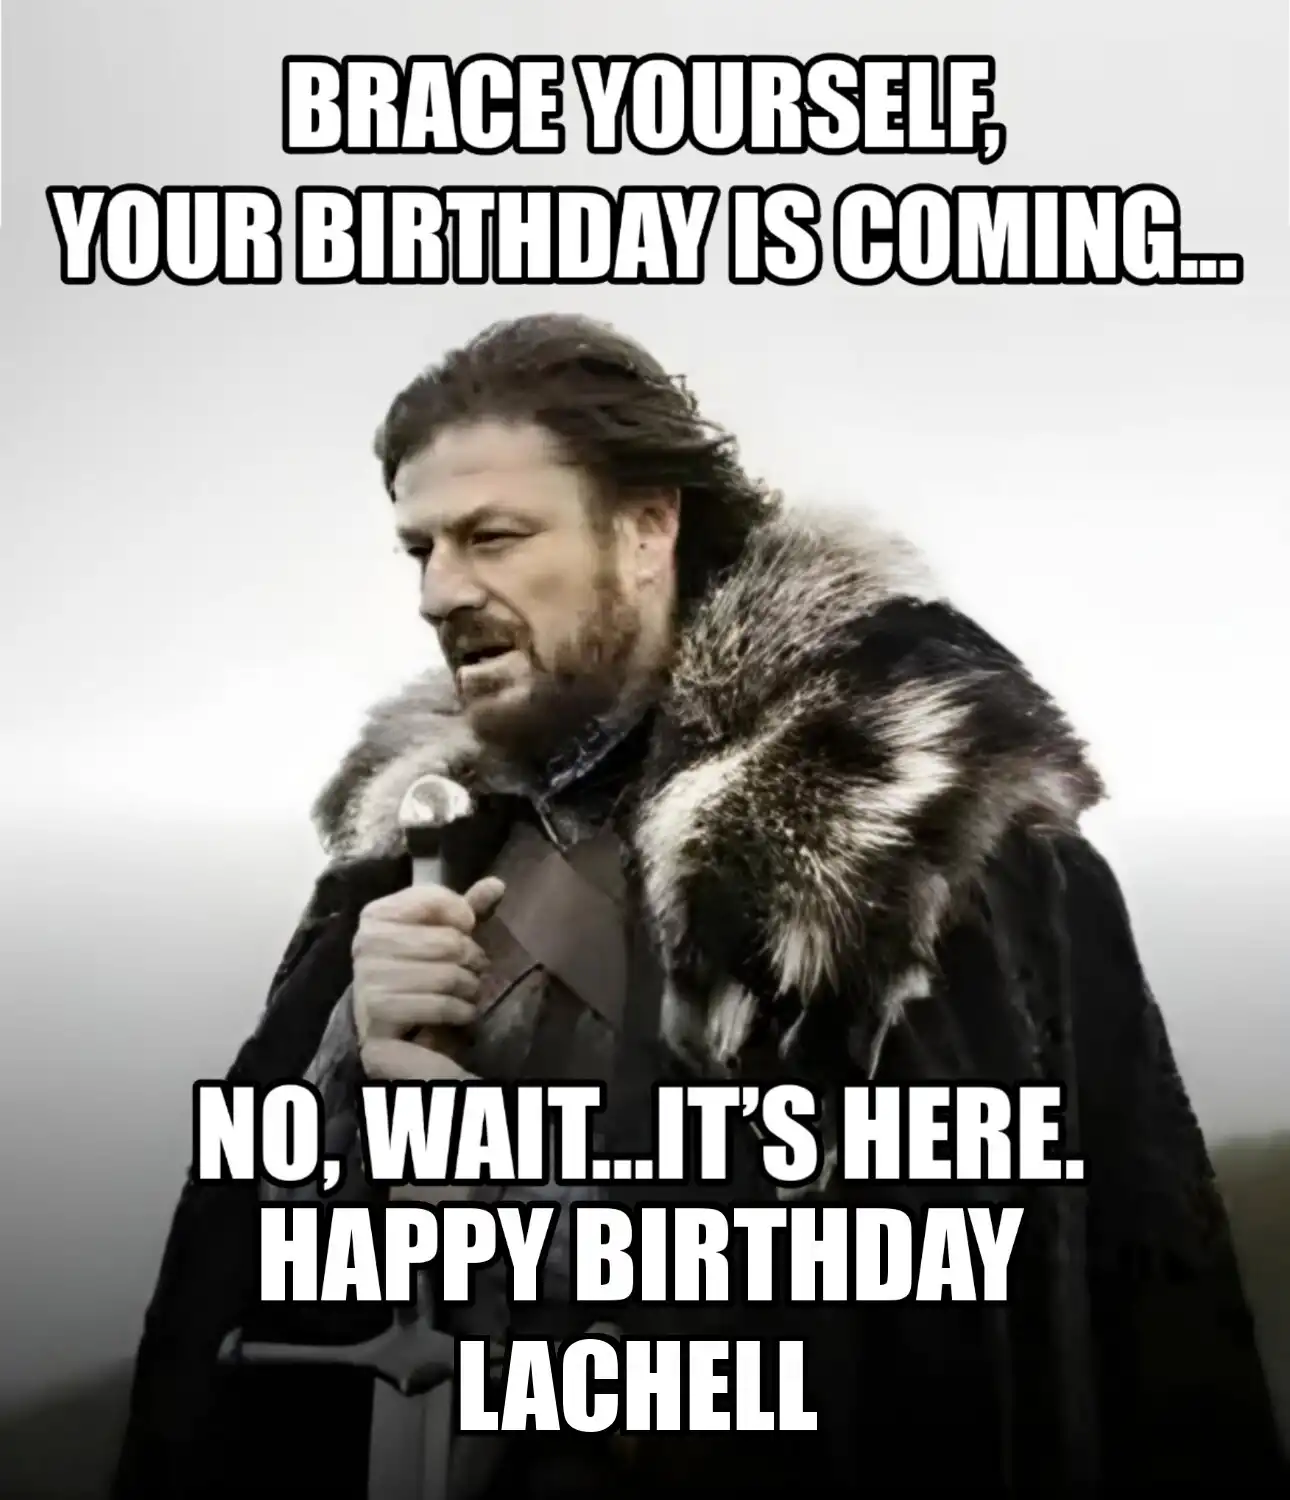 Happy Birthday Lachell Brace Yourself Your Birthday Is Coming Meme